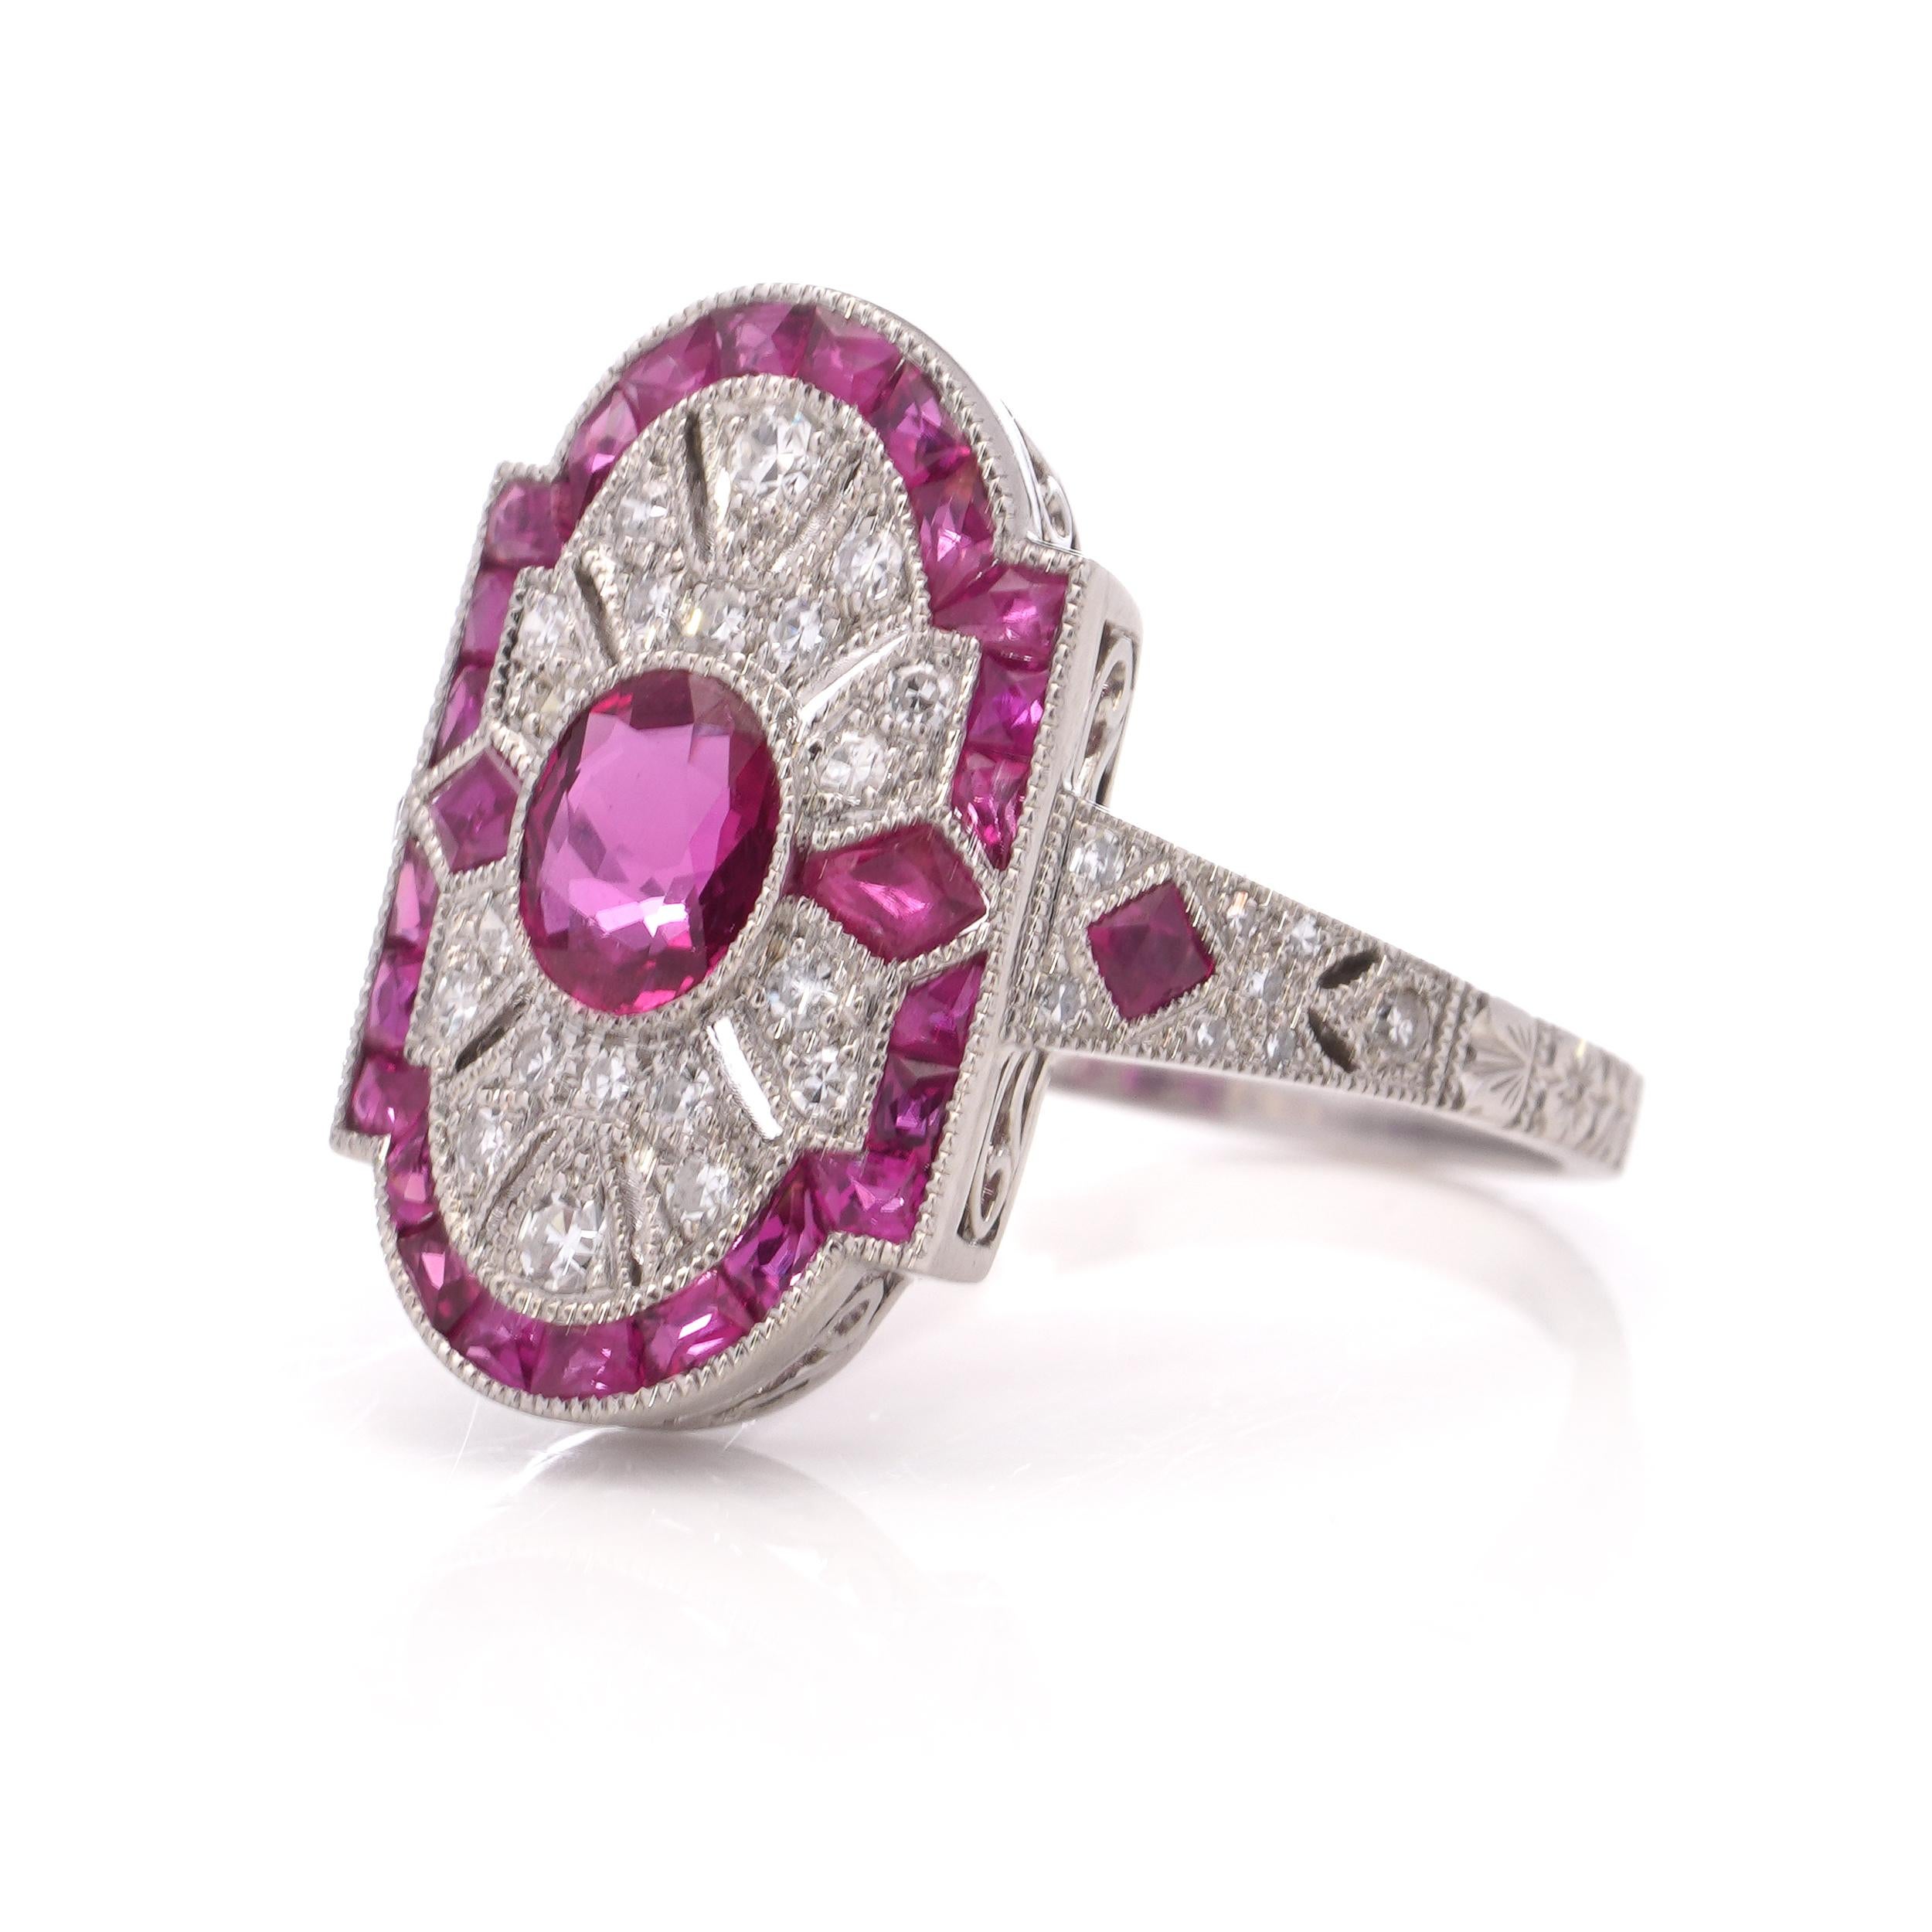 JoAq 850 Platinum Art Deco-inspired ruby cluster ring surrounded by round brilliant cut diamonds. 

Made in After 2000
Maker: JoAq 
Hallmarked for .850 platinum purity. 

Dimensions - 
Finger Size (UK) = L 1/2 (EU) = 53.5 (US) = 6.25
Weight: 5.2